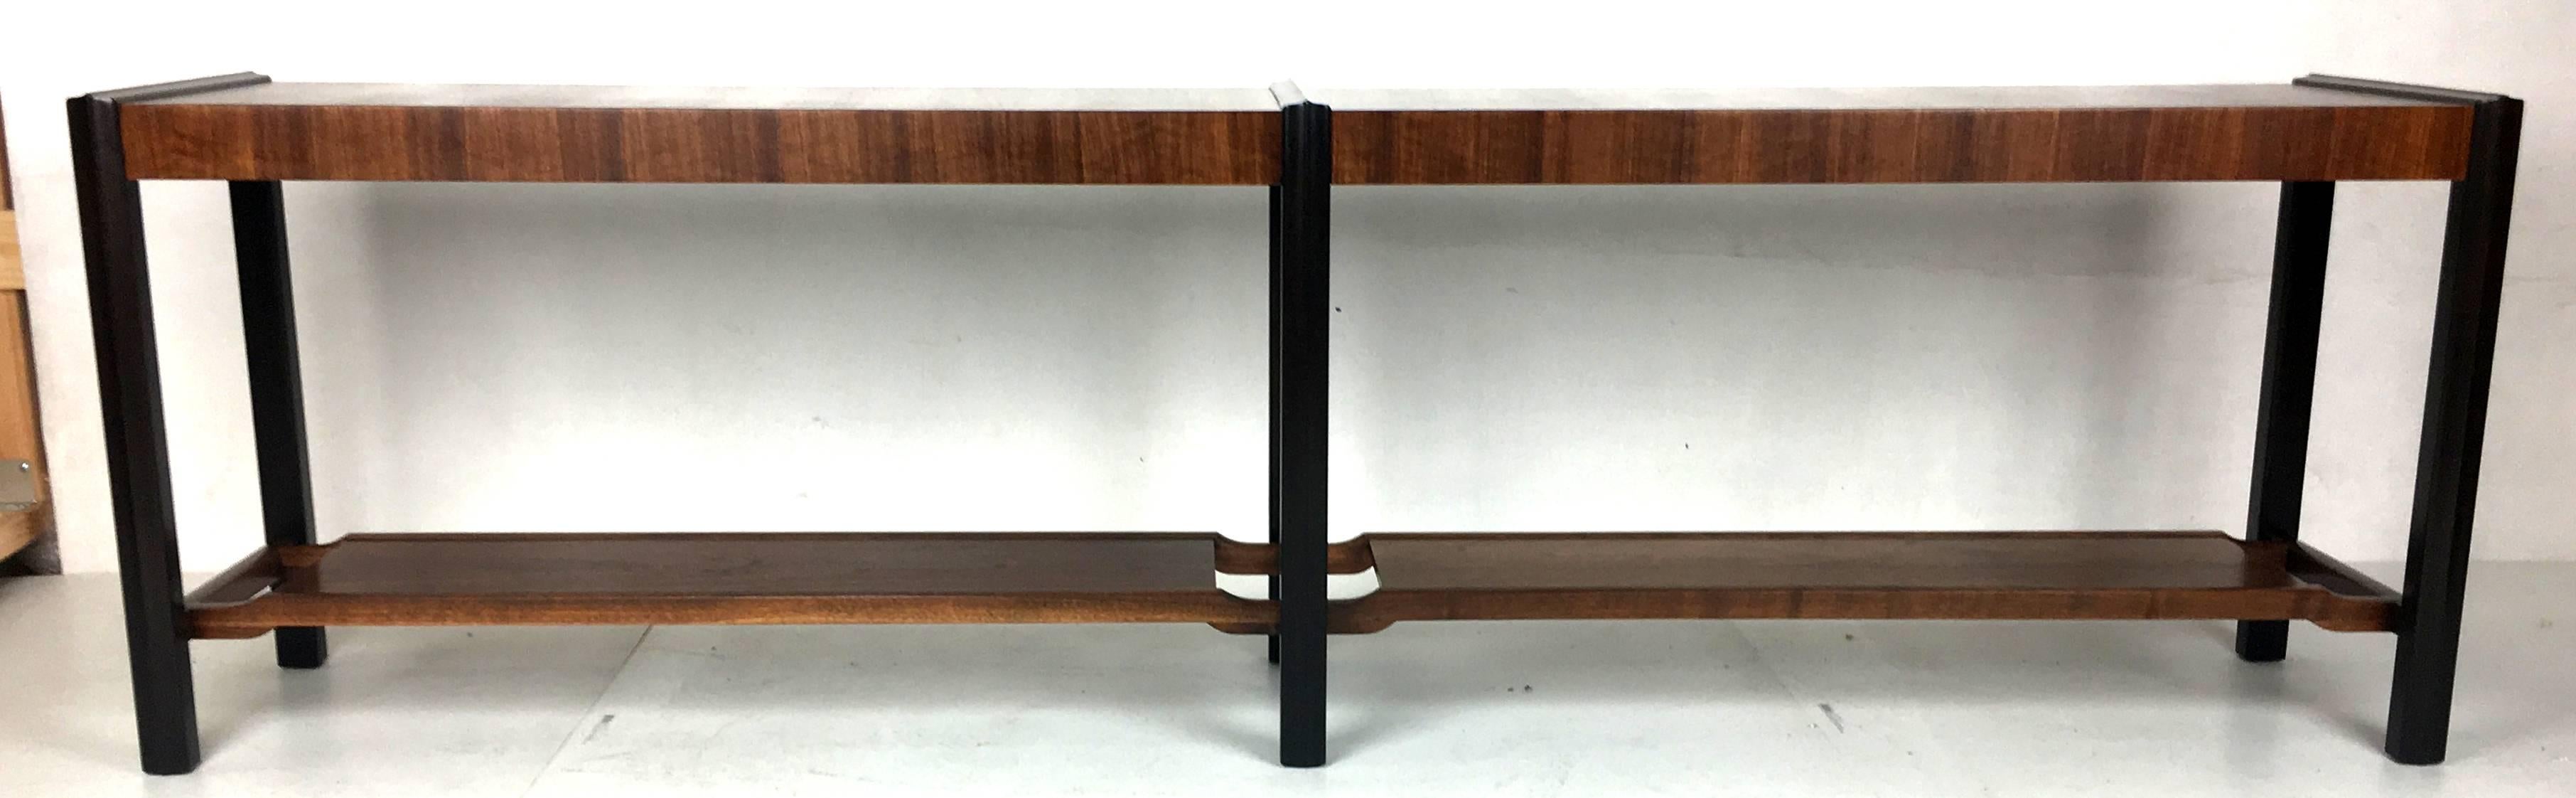 Beautifully crafted long and low console table with dark mahogany supports and rosewood veneered shelves. The entire piece is finely detailed along with the offset bottom shelves. This is a first class piece of Modernist furniture in the style of